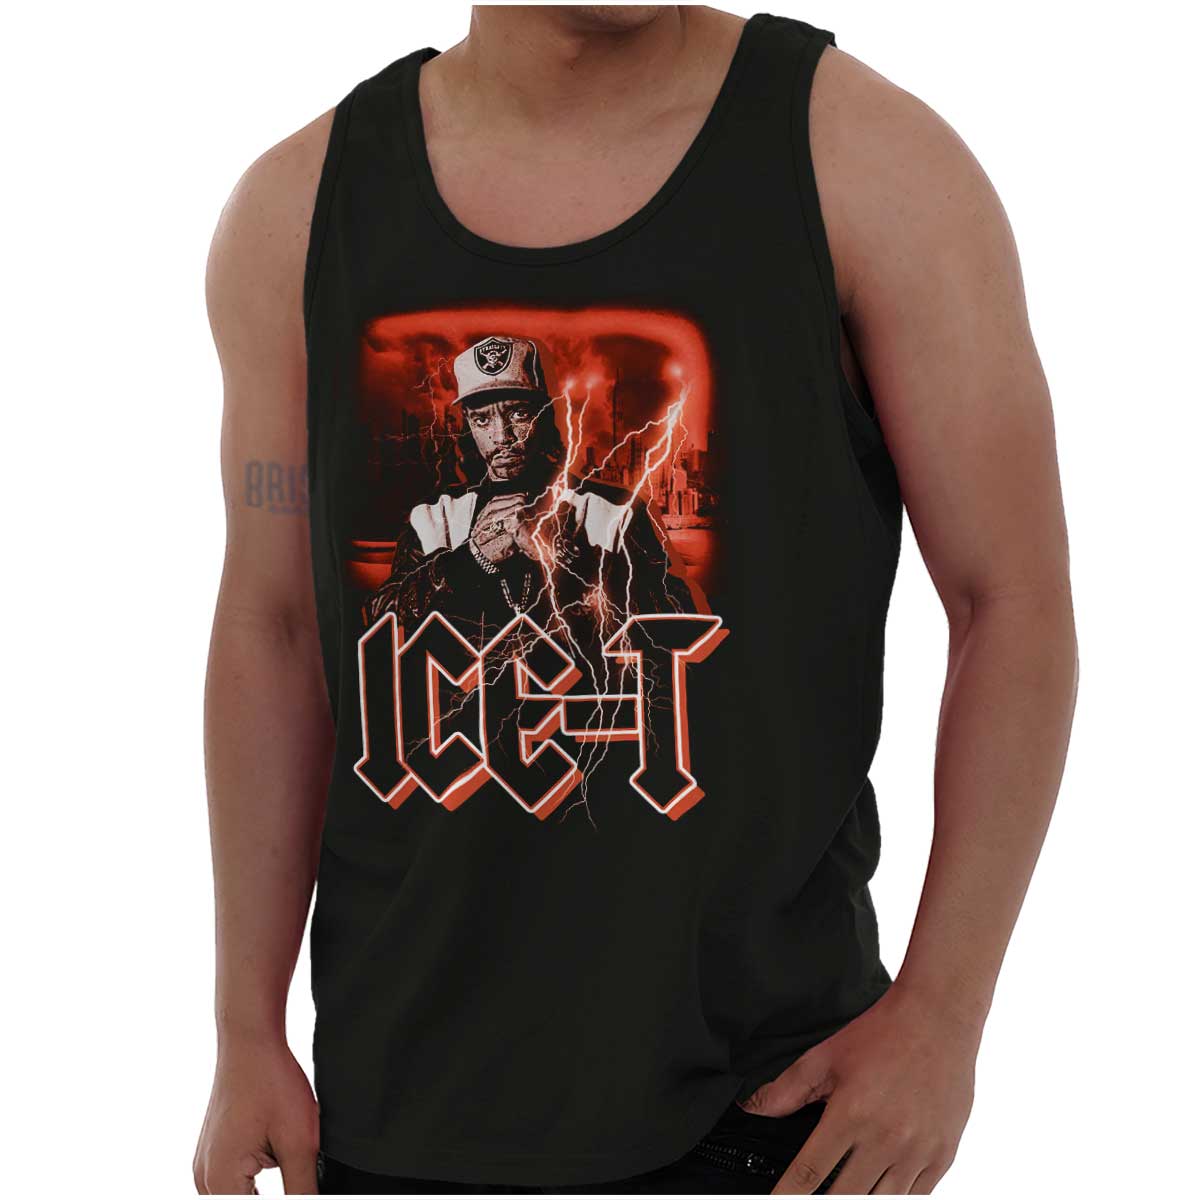 This image shows a graffiti-style picture of ICE-T with red skies and storms, representing rebellion and the enduring spirit of hip-hop, so embrace the vibe and let your style shine with this cool piece.